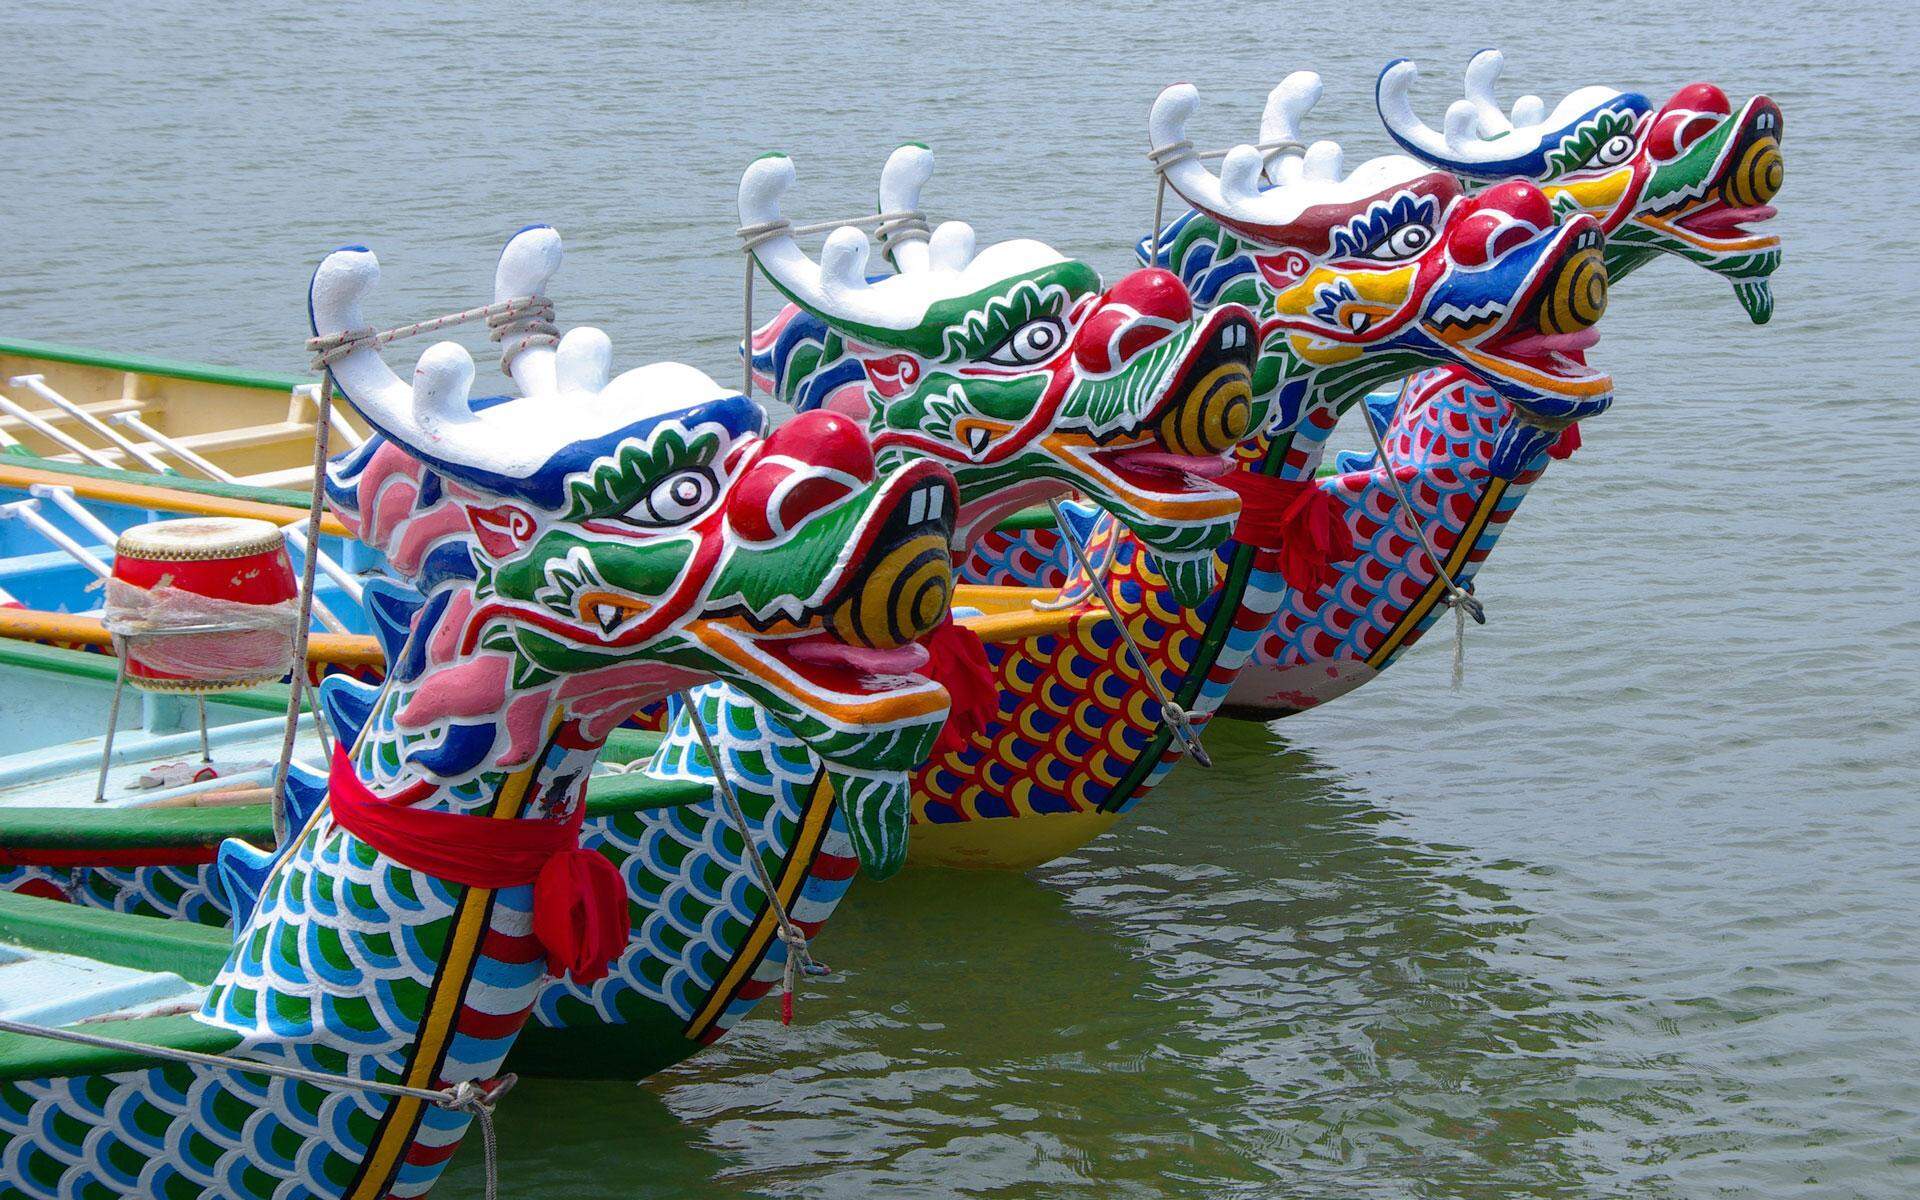 8 Facts About Duanwu Festival (Dragon Boat Festival)